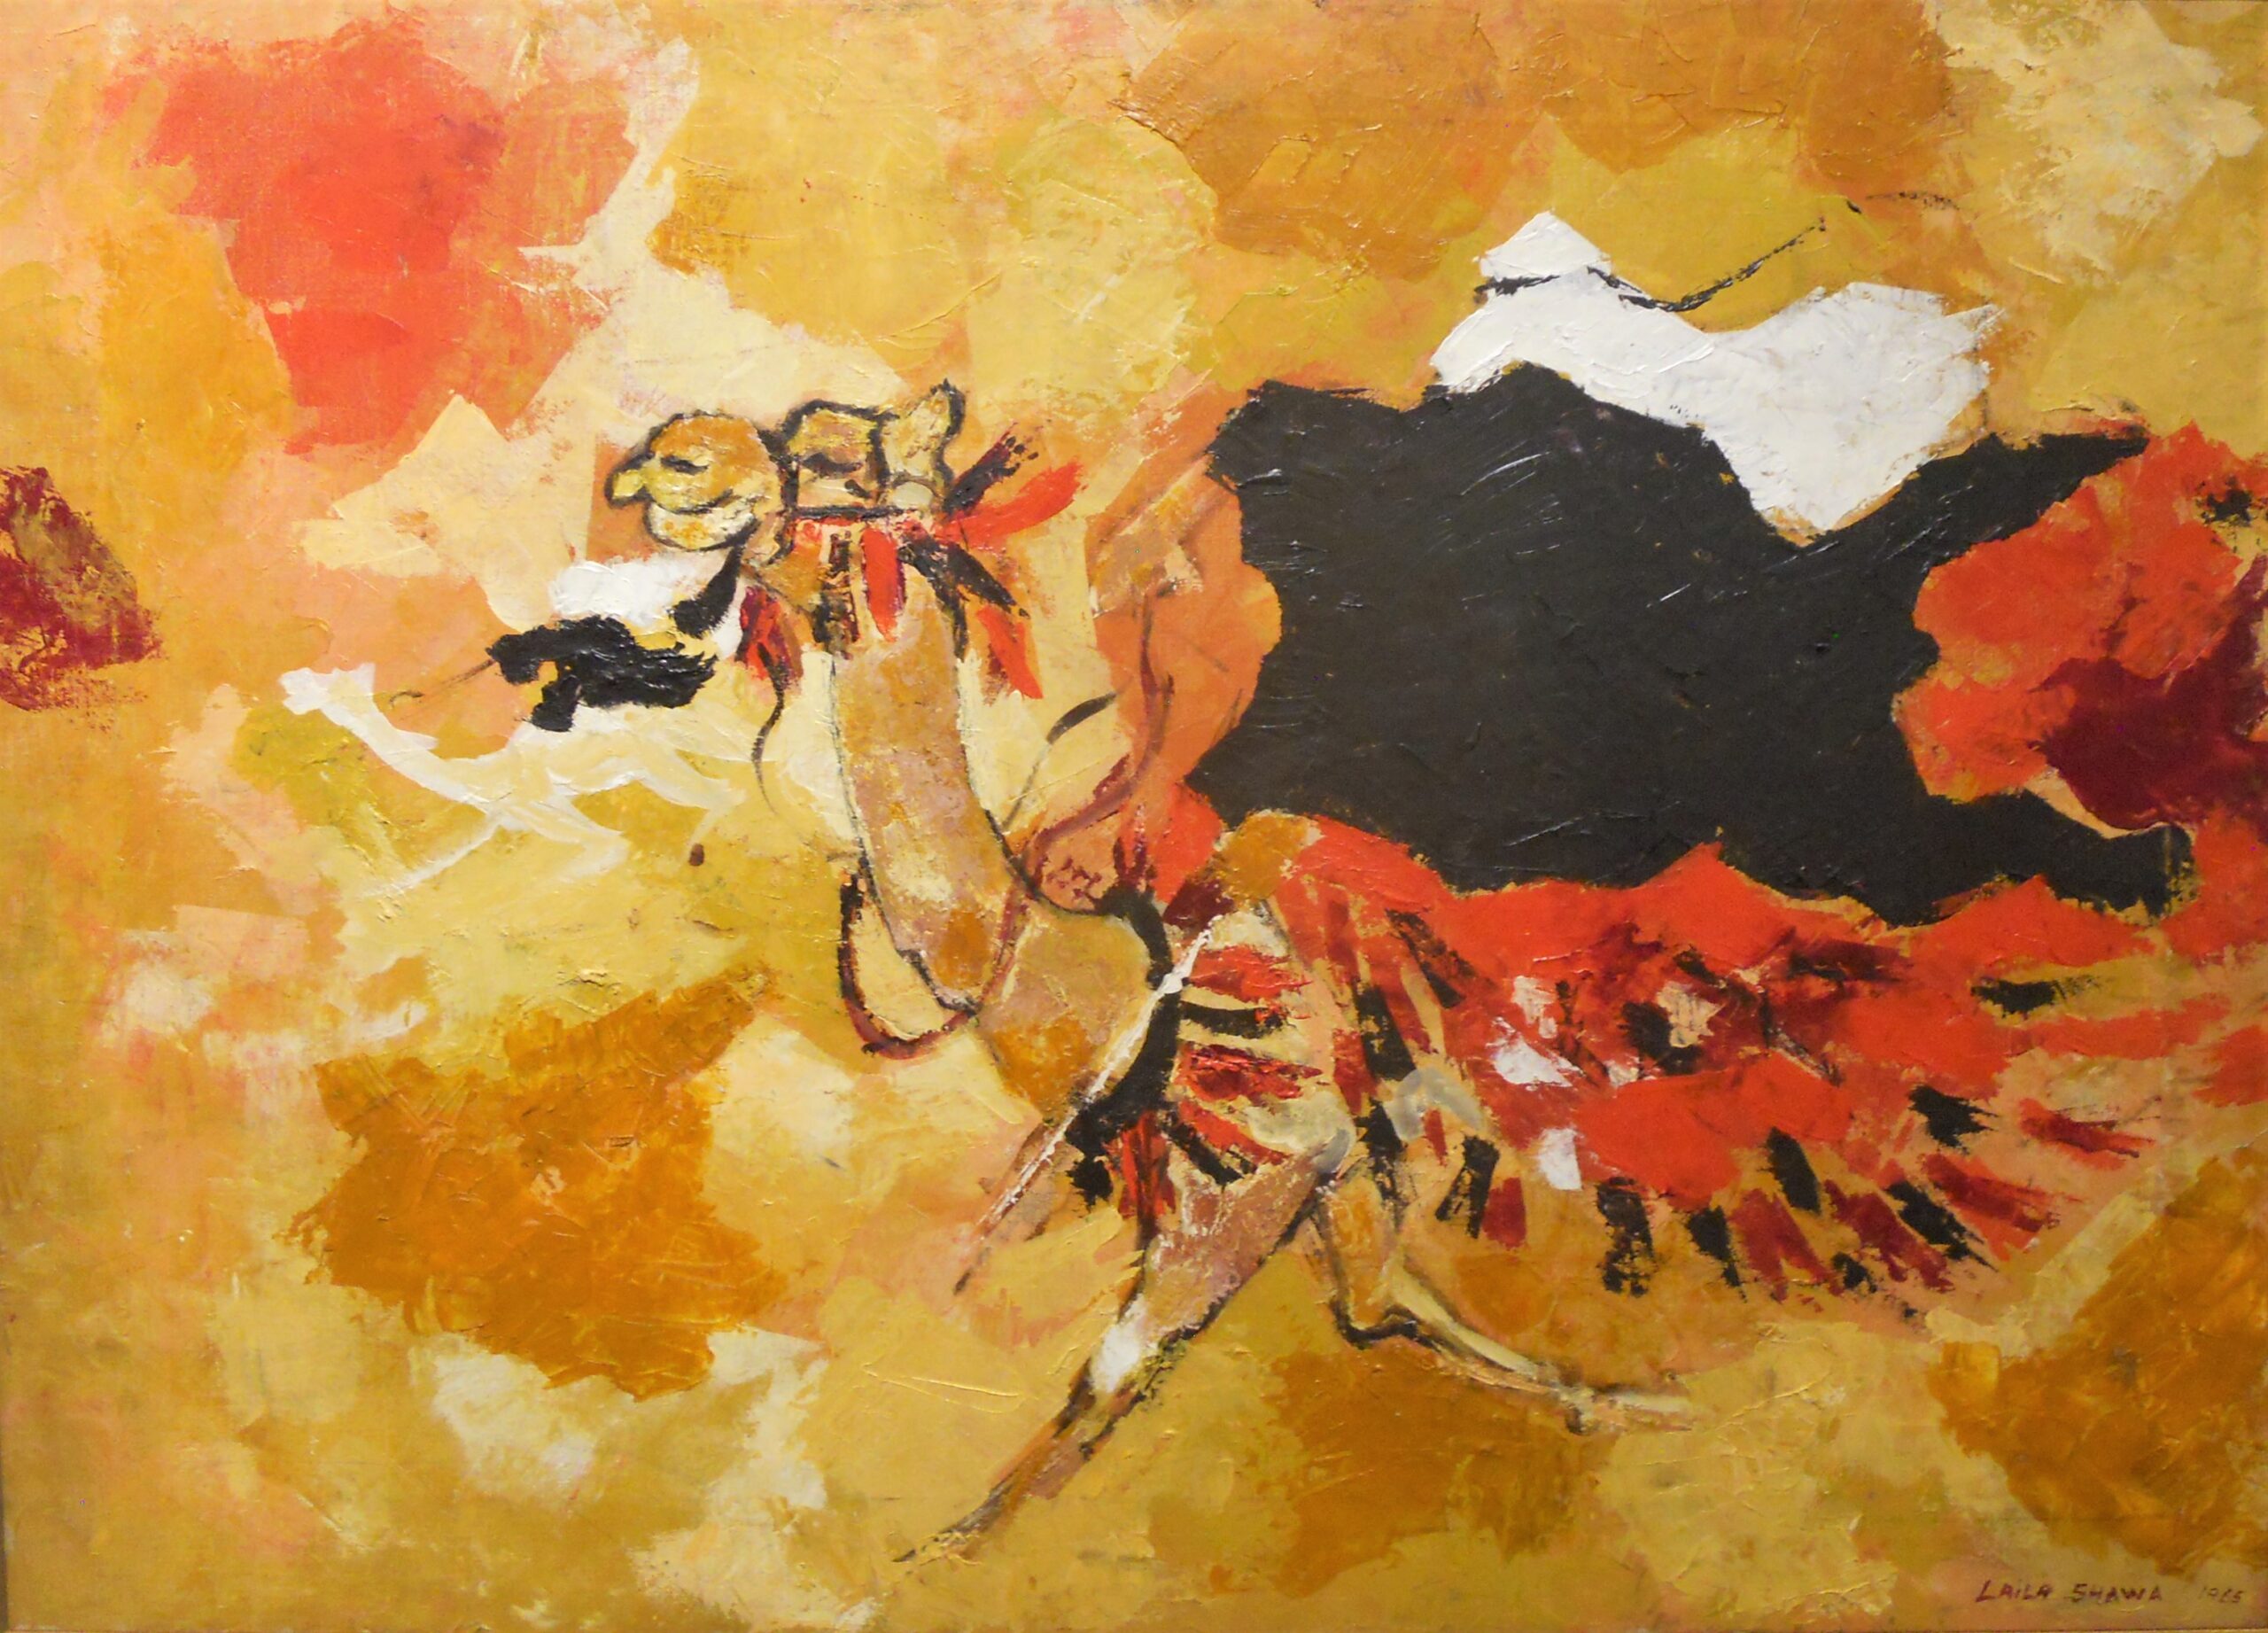 Image of a painting of a person riding a camel against a sandy background.